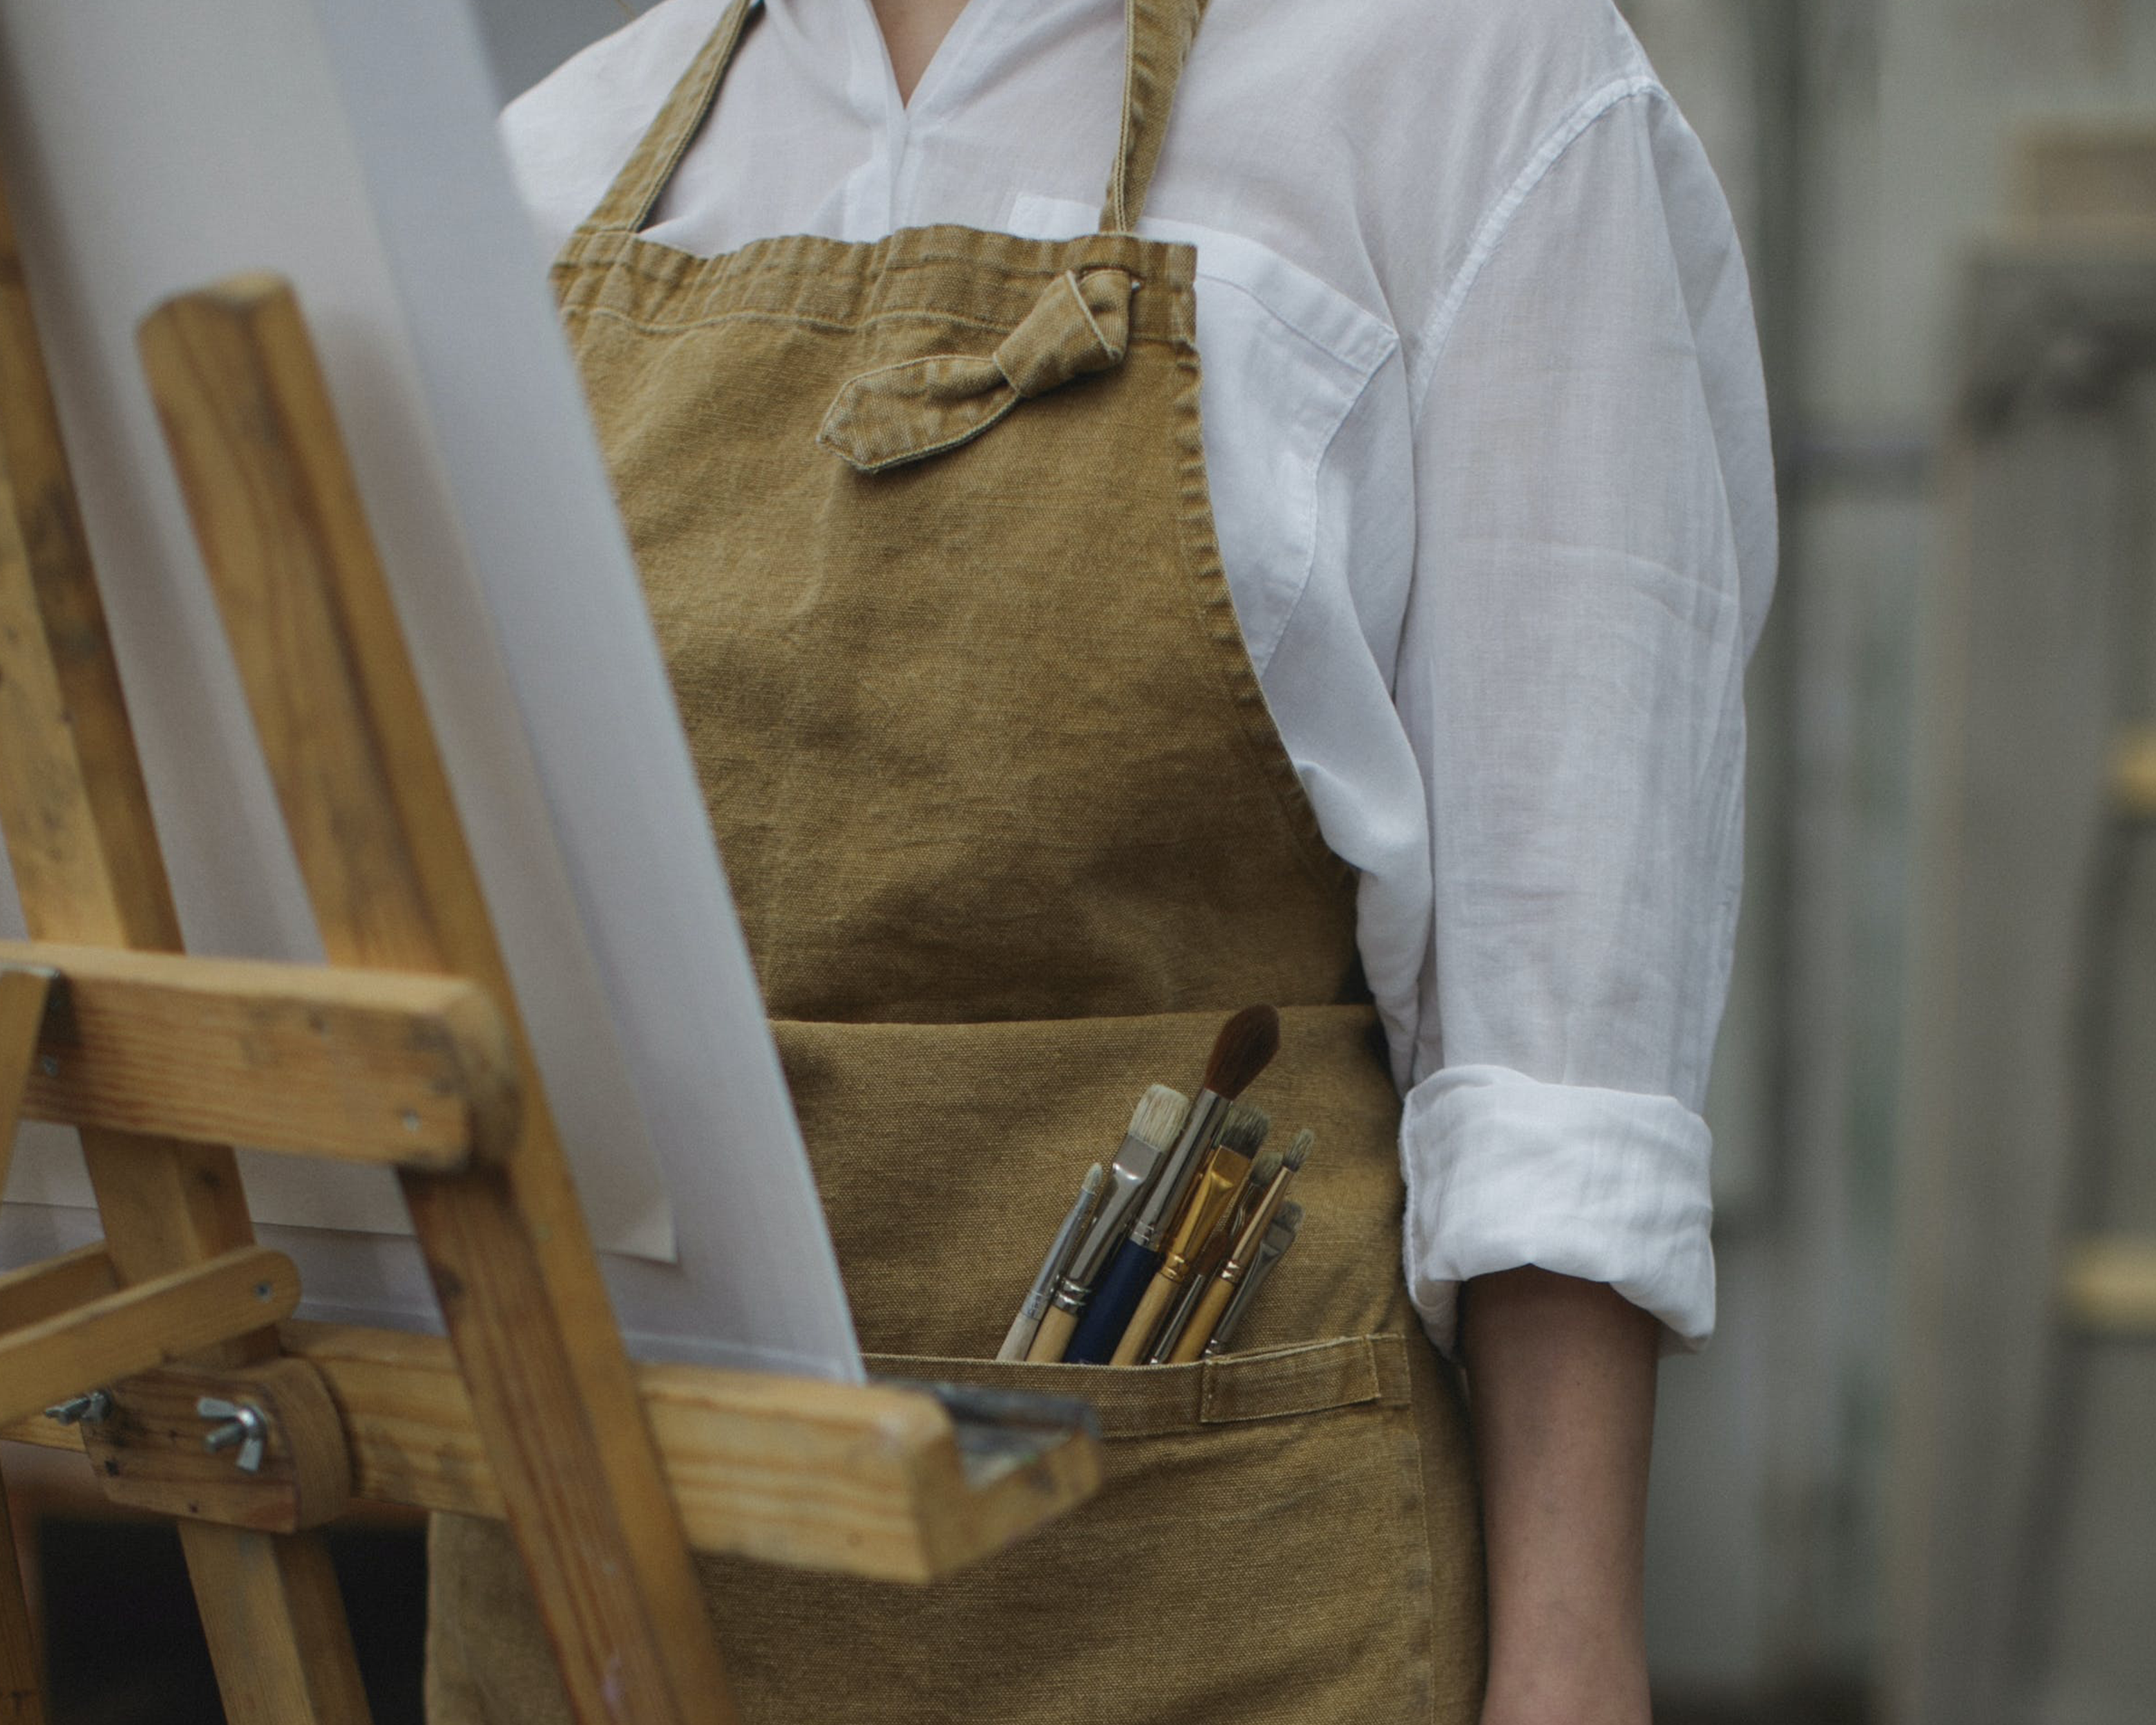 An image of a person stood in front of an easel with an apron on. They are wearing a white shirt and have paint brushes sticking out of their pocket.